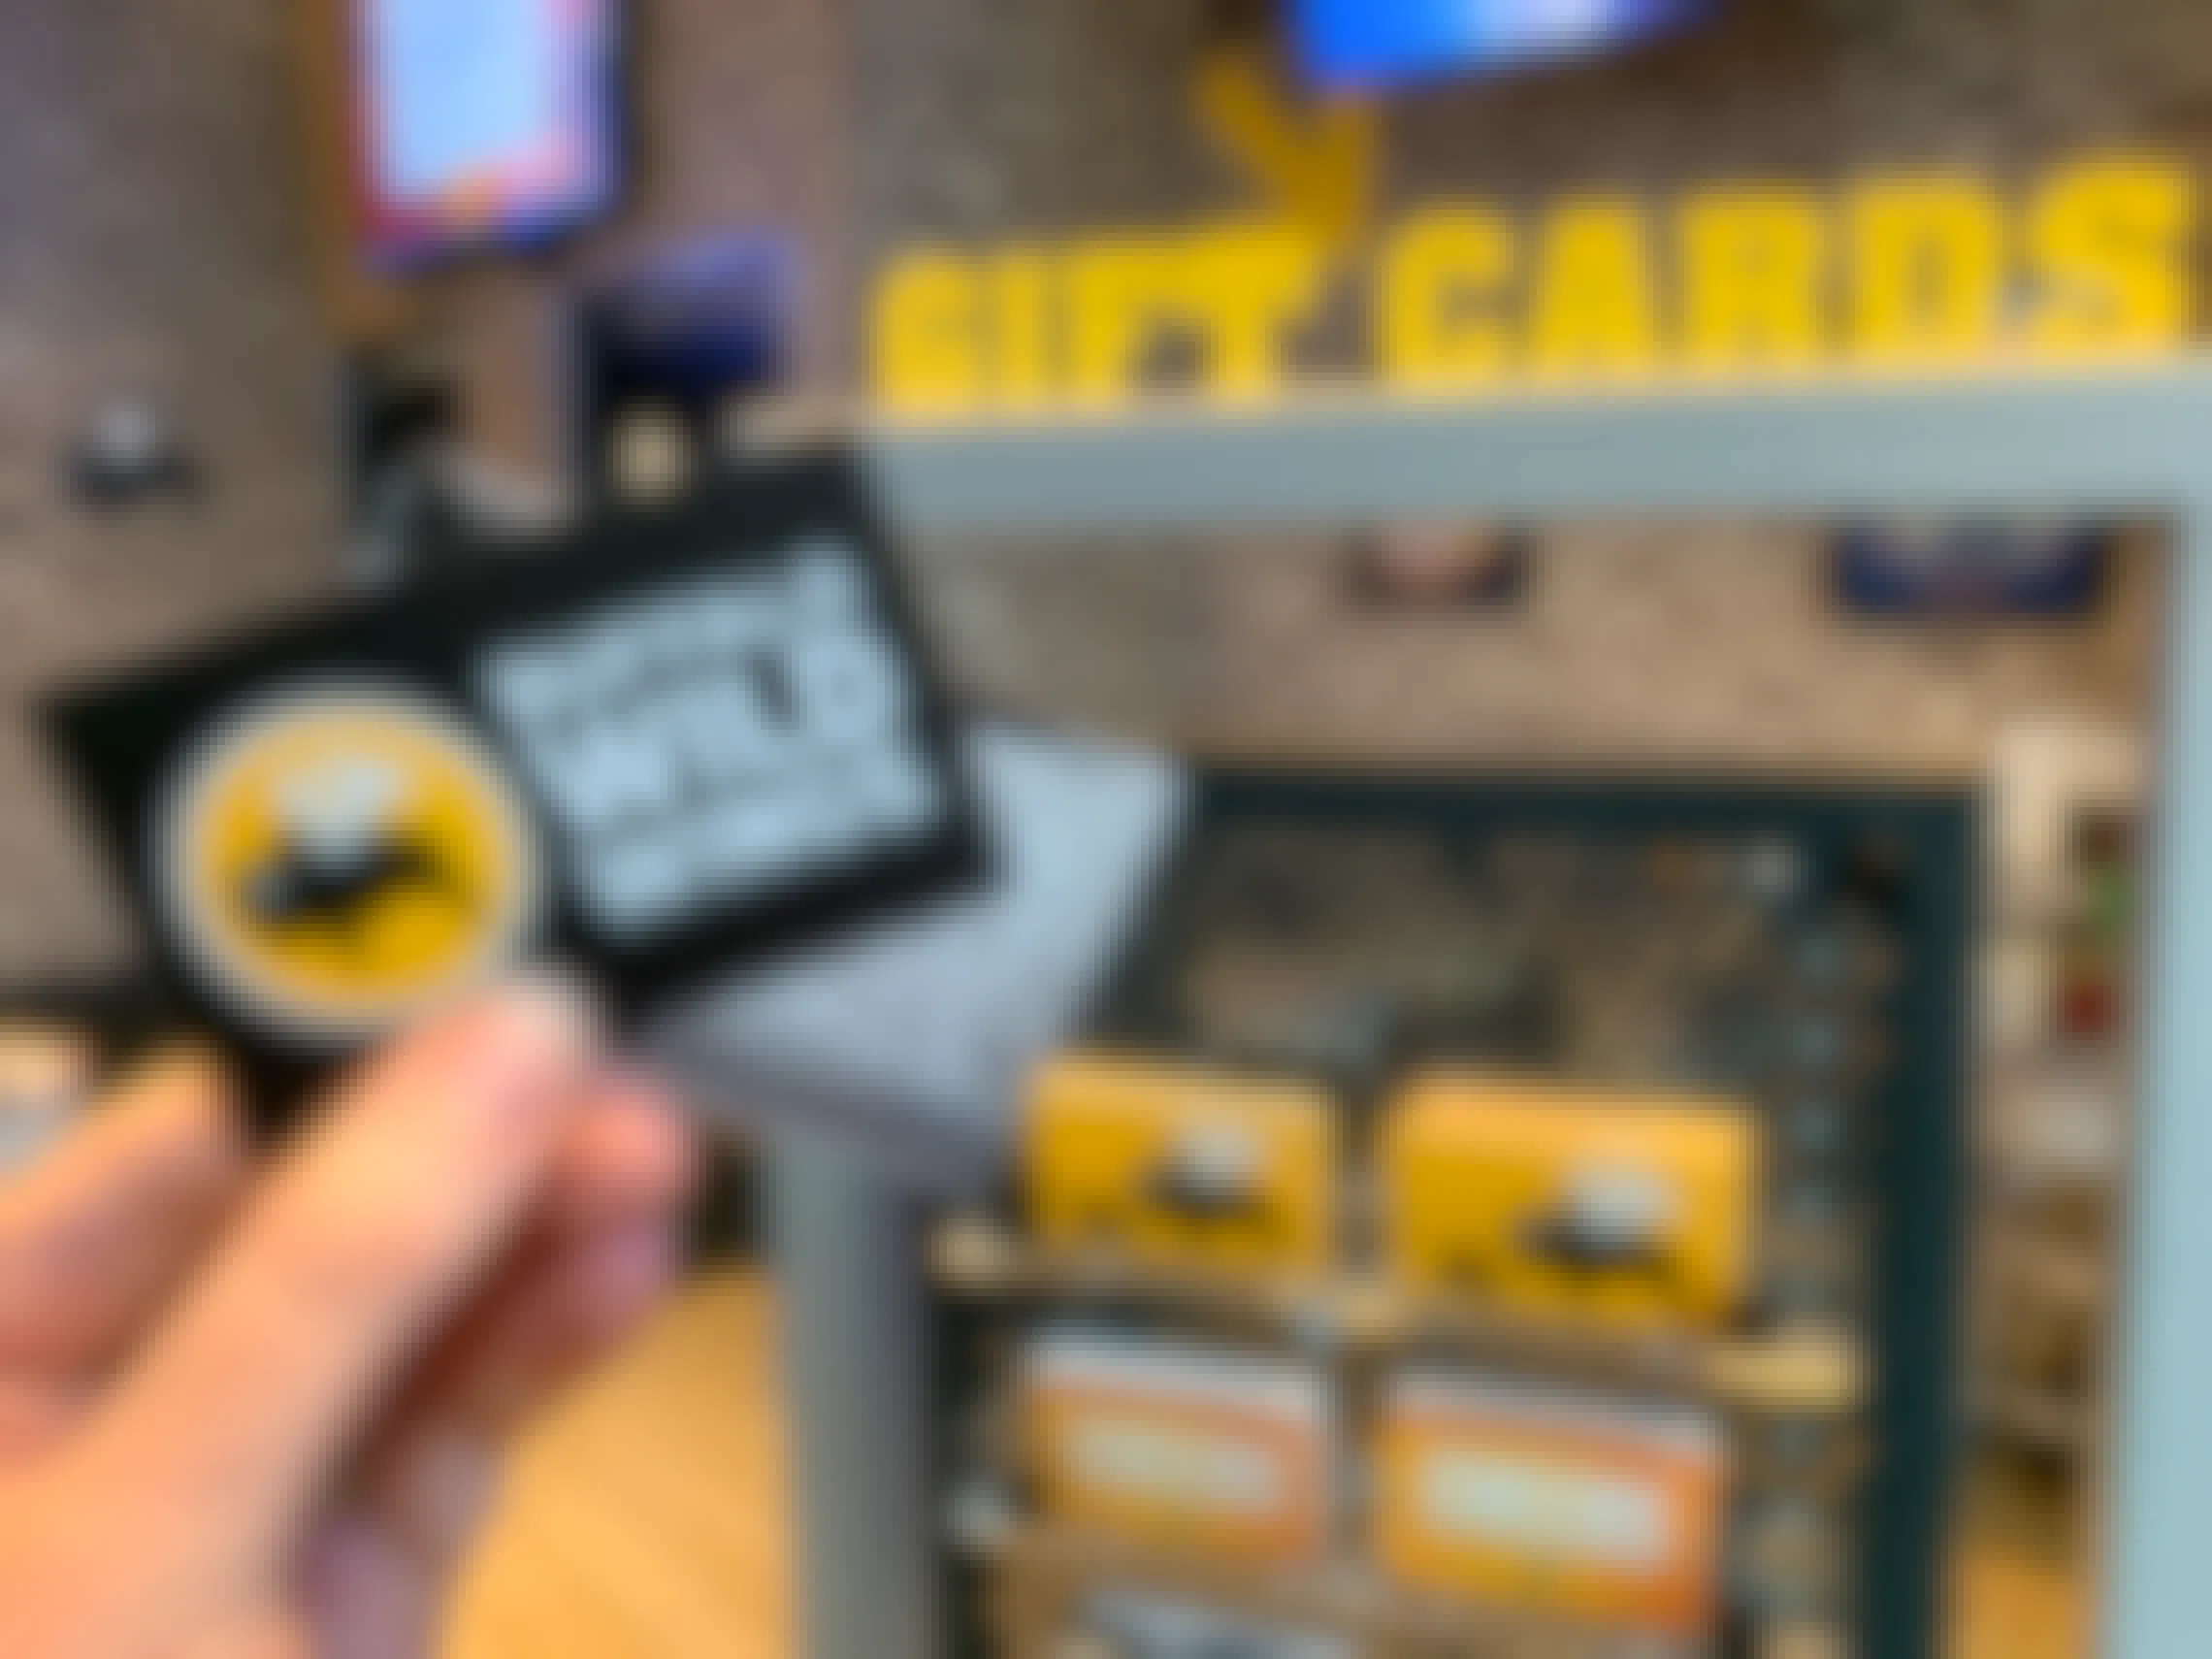 Someone holding two Buffalo Wild Wings gift cards in front of the Gift Card stand inside Buffalo Wild Wings.